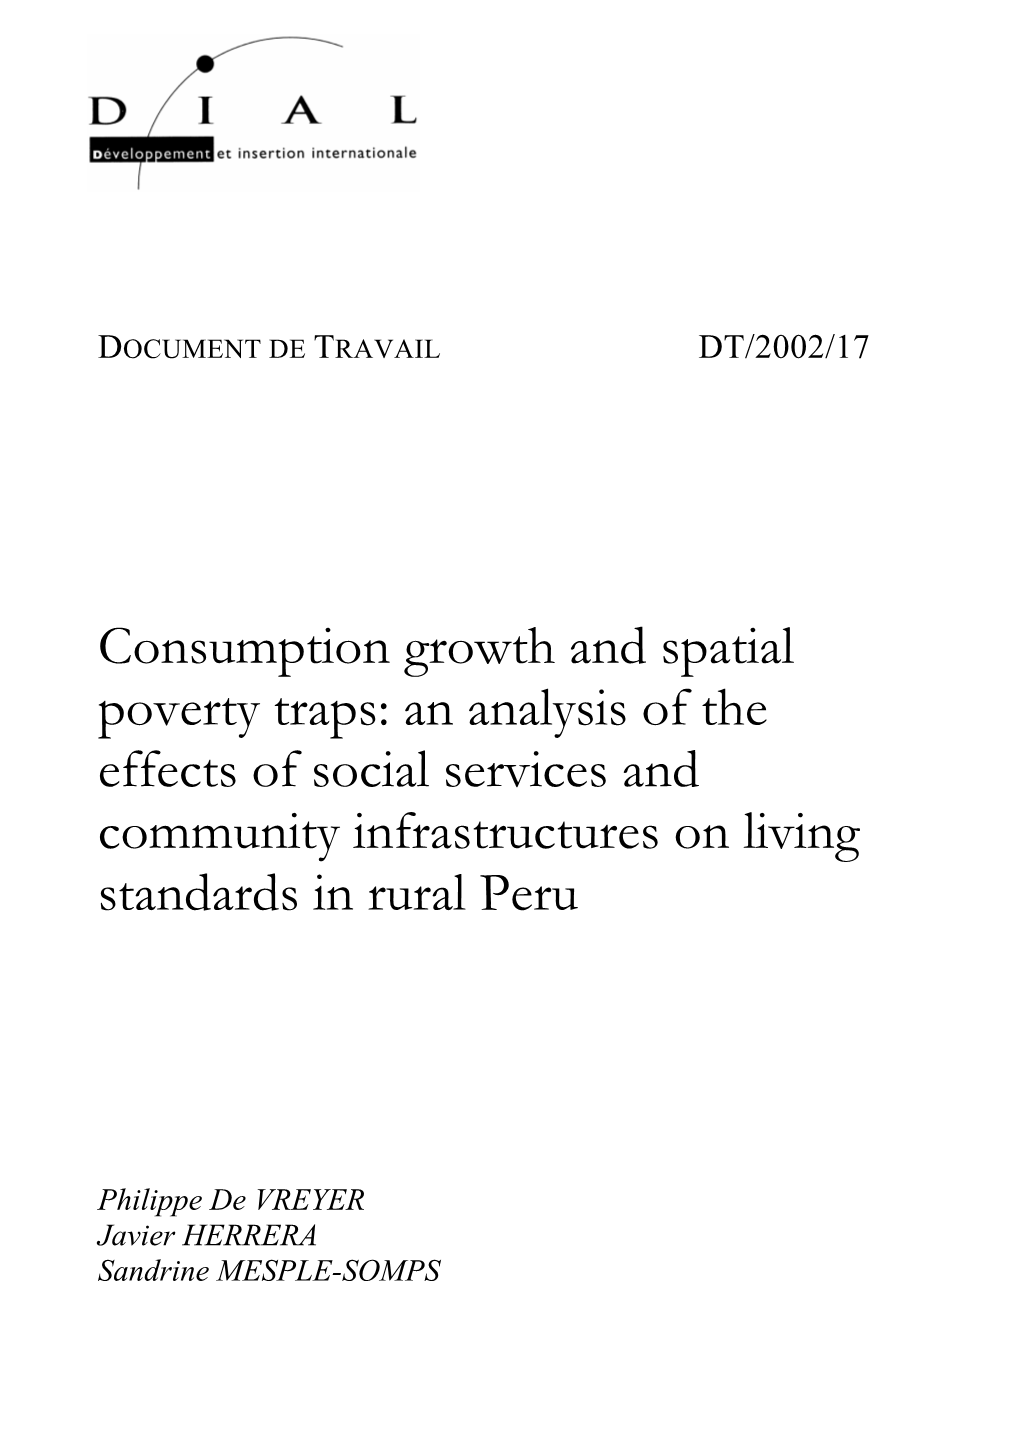 Consumption Growth and Spatial Poverty Traps: an Analysis of the Effects of Social Services and Community Infrastructures on Living Standards in Rural Peru